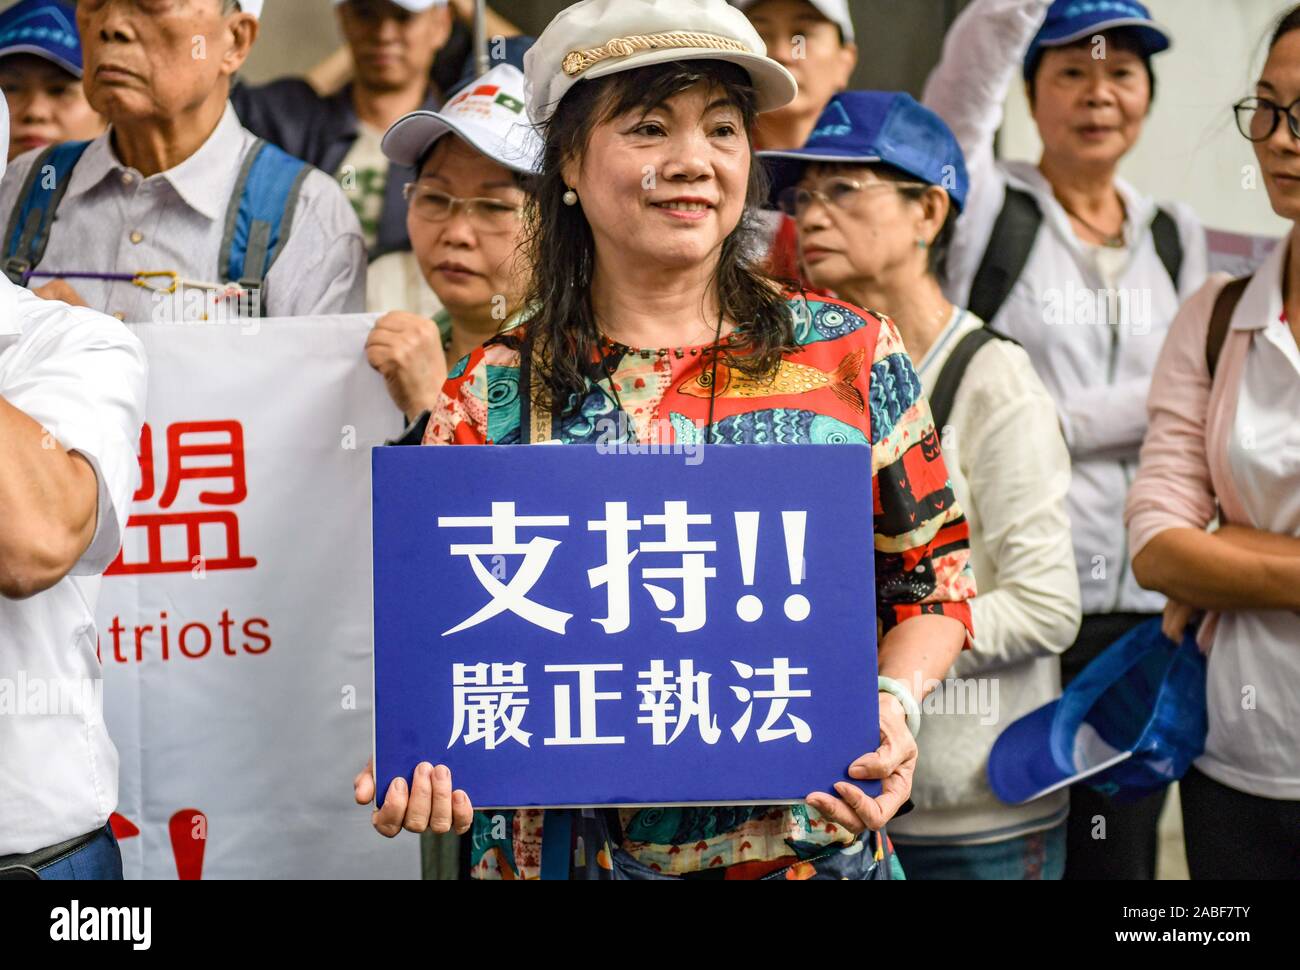 People gather outside the Hong Kong Police Headquarters to support Hong Kong policemen in Hong Kong, China, 29 October 2019. Stock Photo